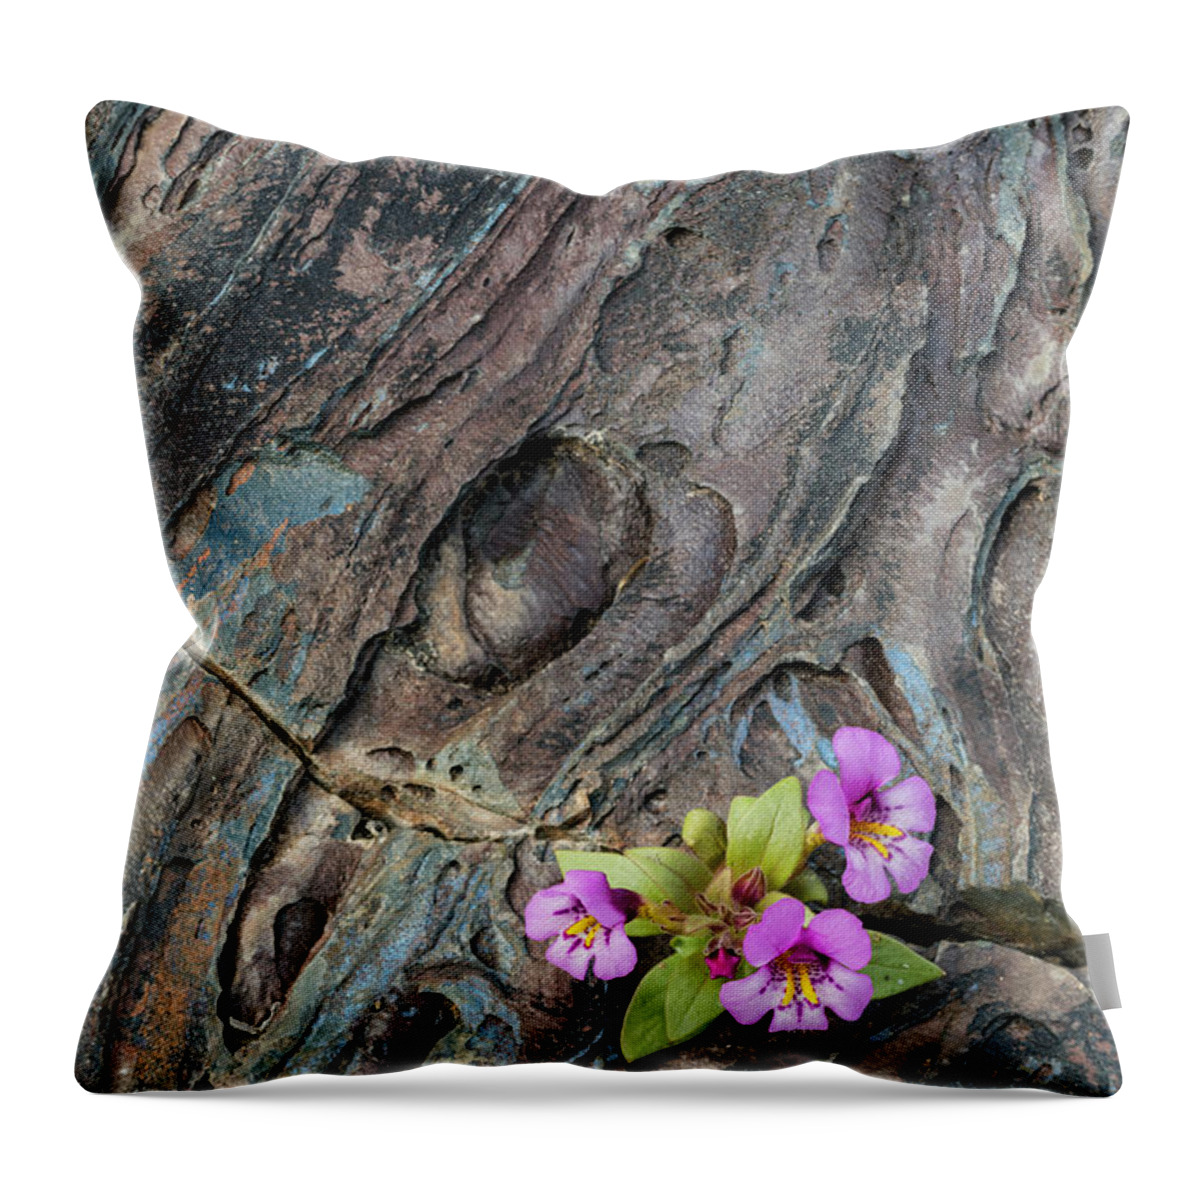 Jeff Foott Throw Pillow featuring the photograph Purole Monkeyflower In Old Lava by Jeff Foott